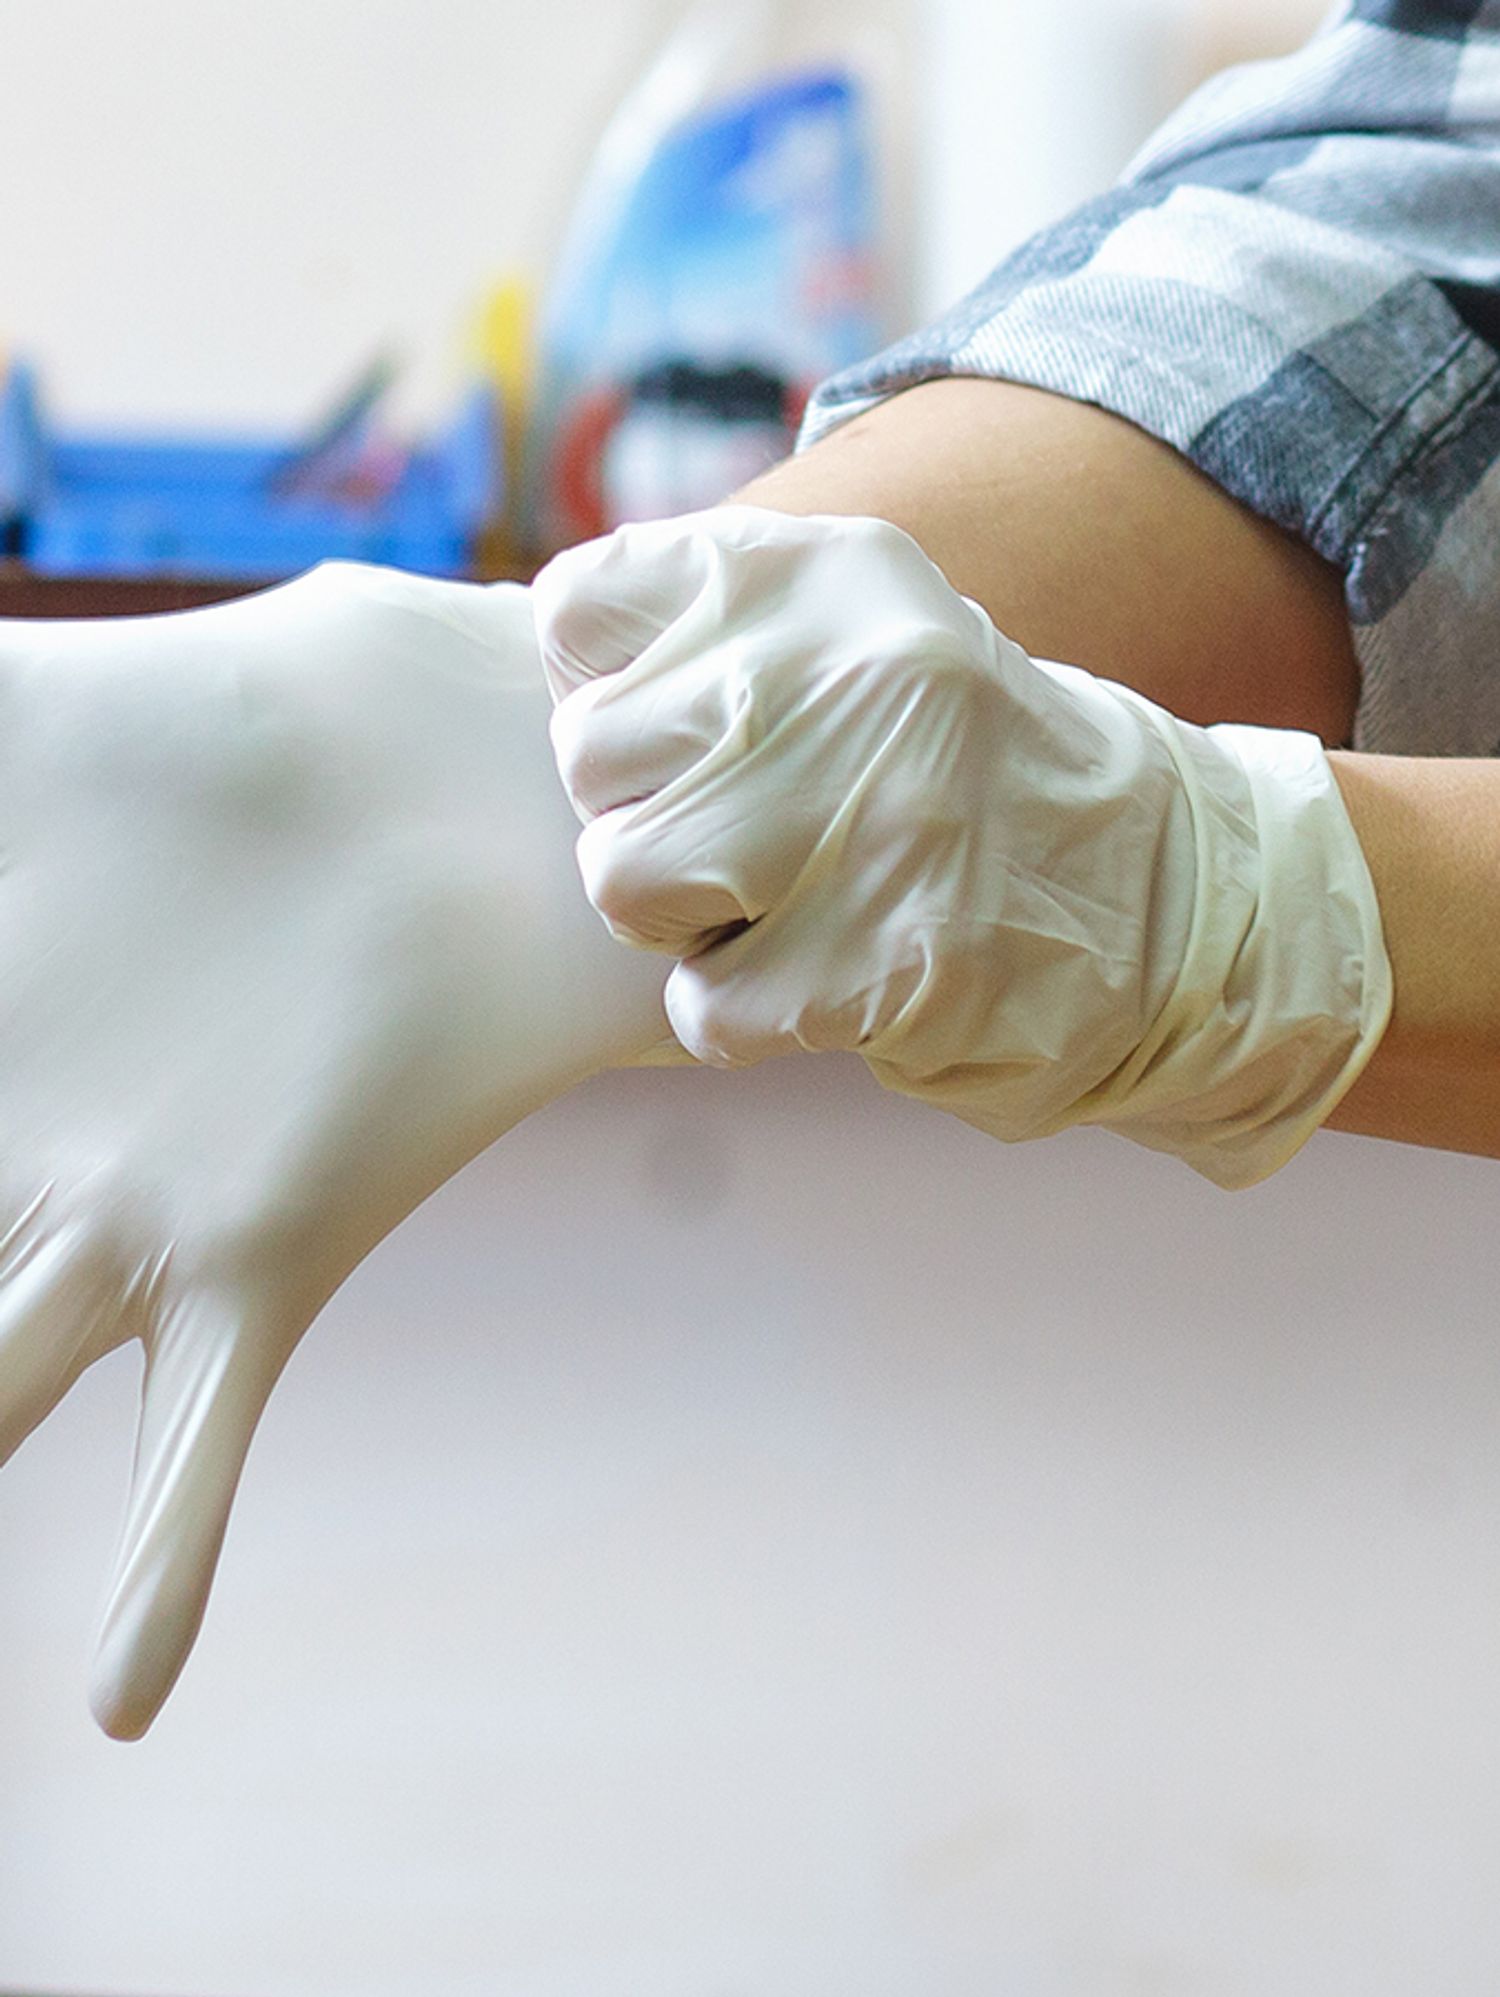 How to Prevent Latex Glove Allergies - Online Safety Trainer